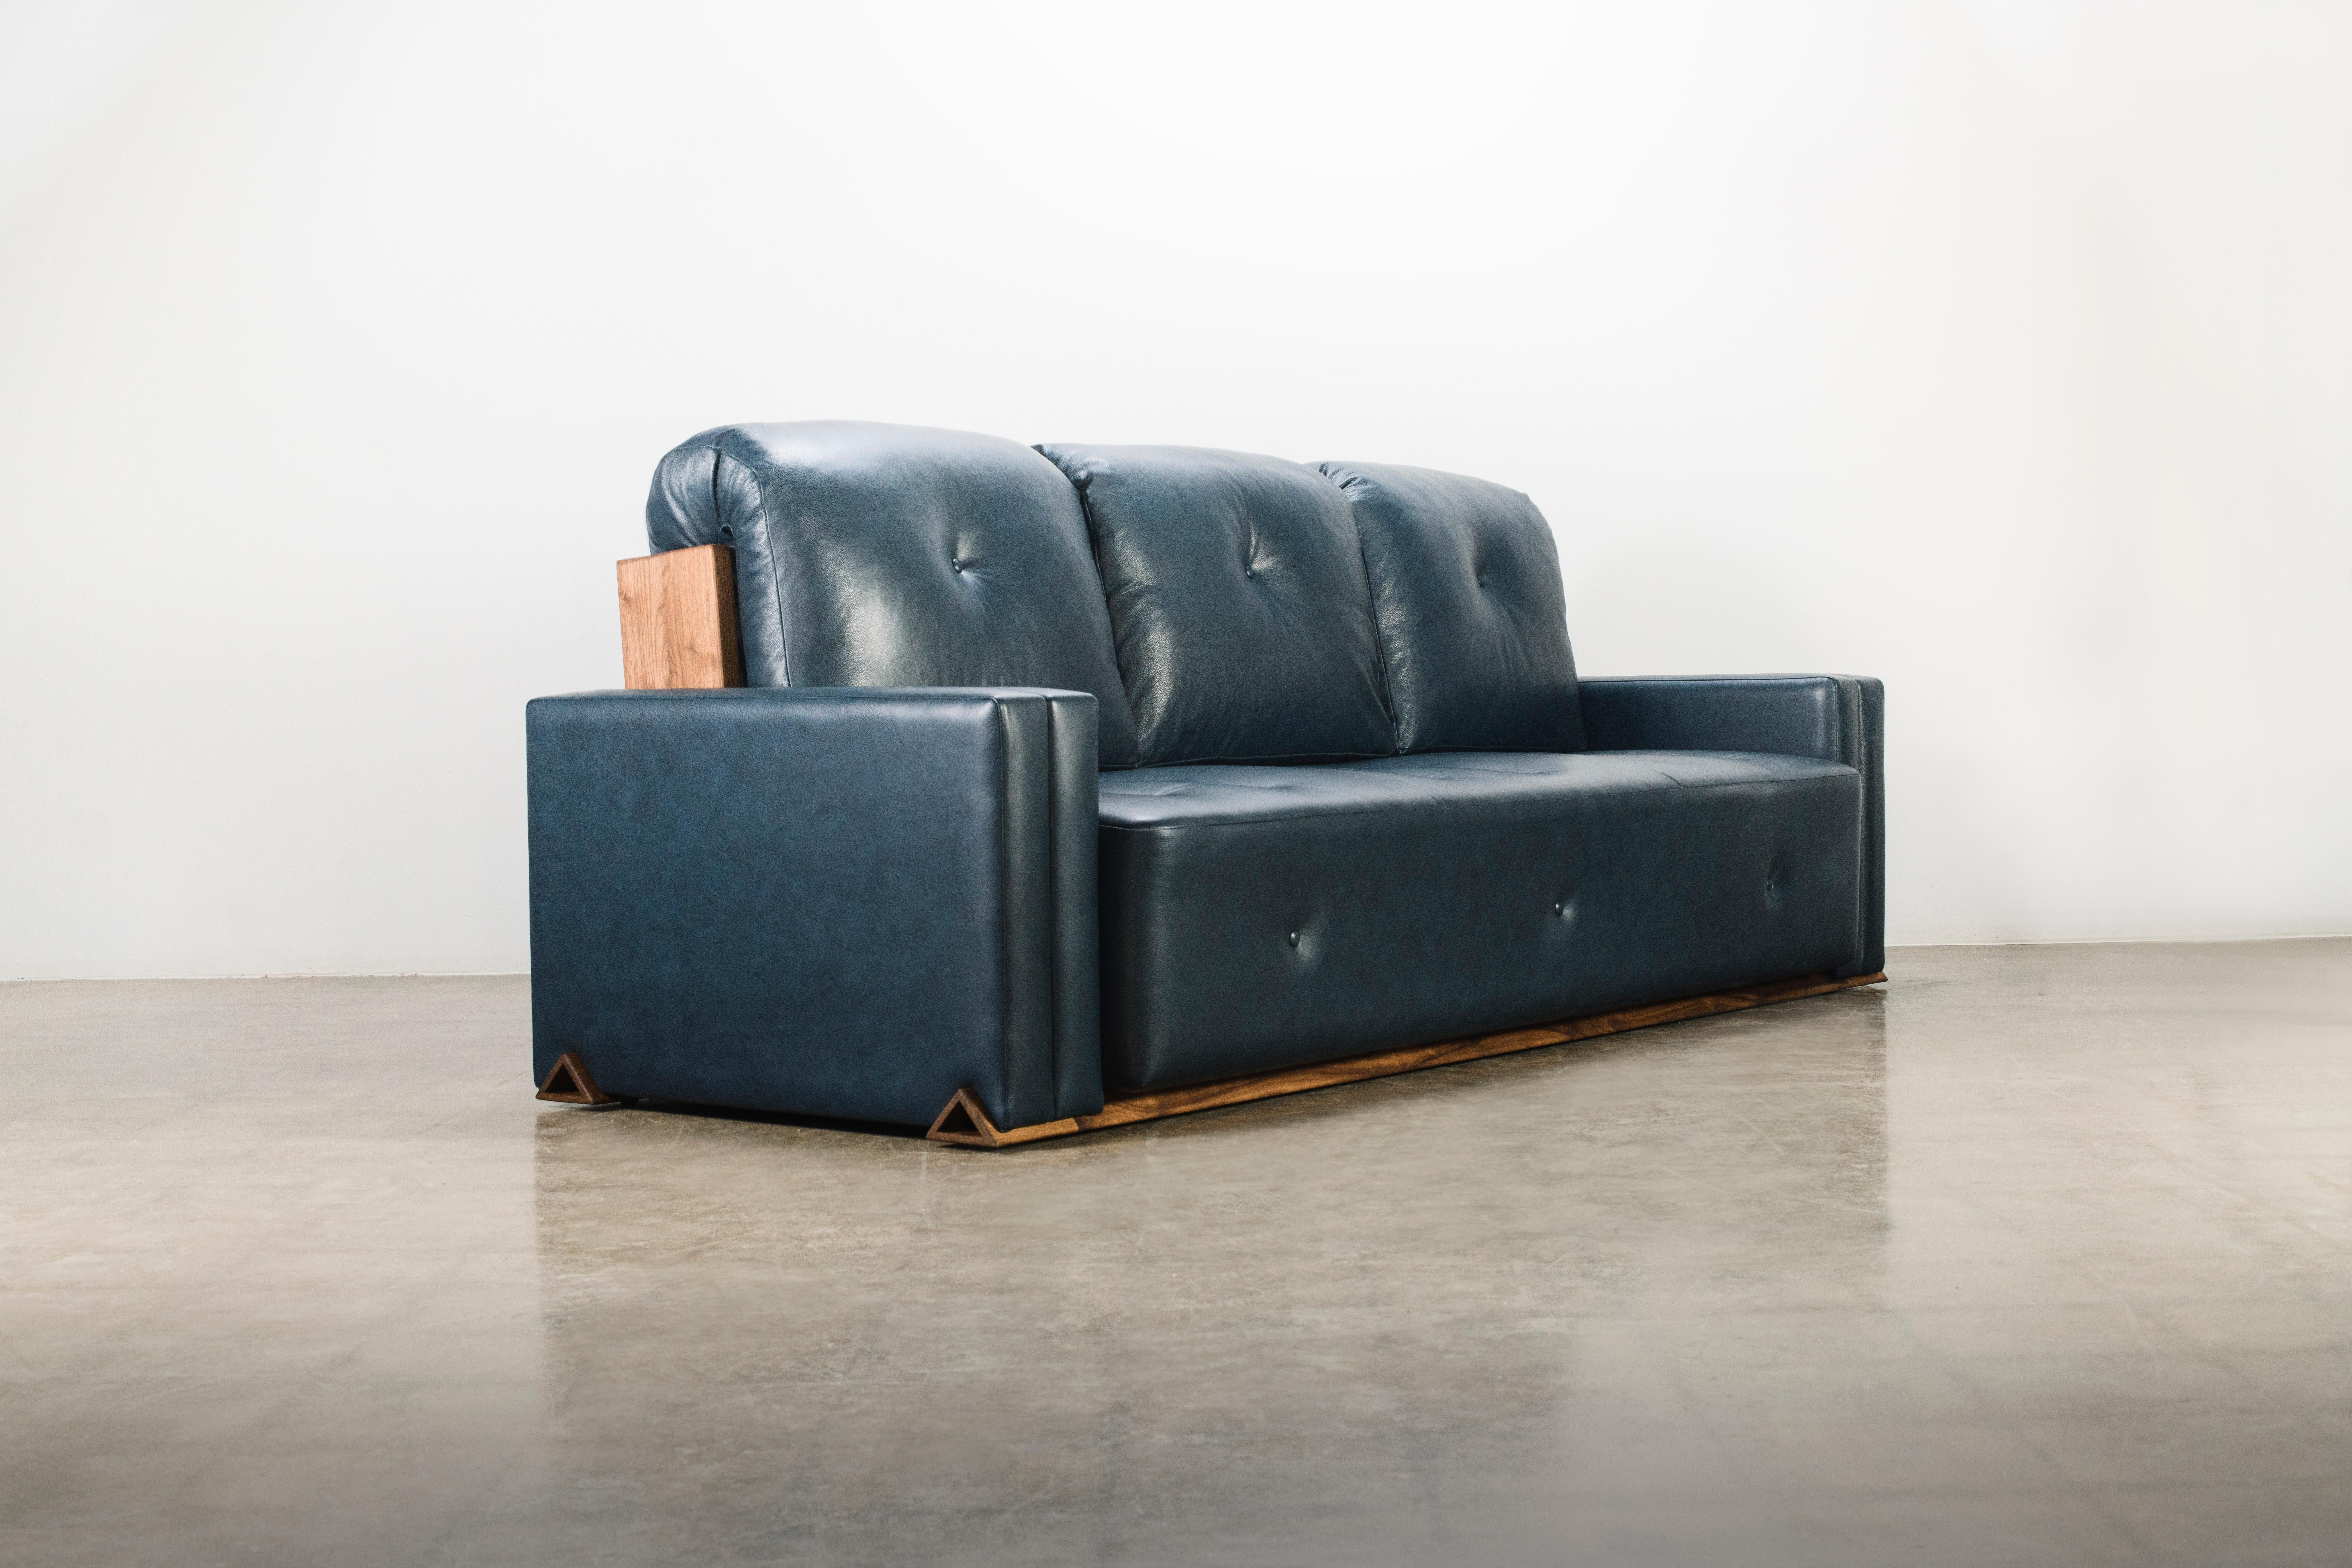 Hand-Crafted There, There Sofa by Levi Christiansen in Walnut and Ink Leather For Sale